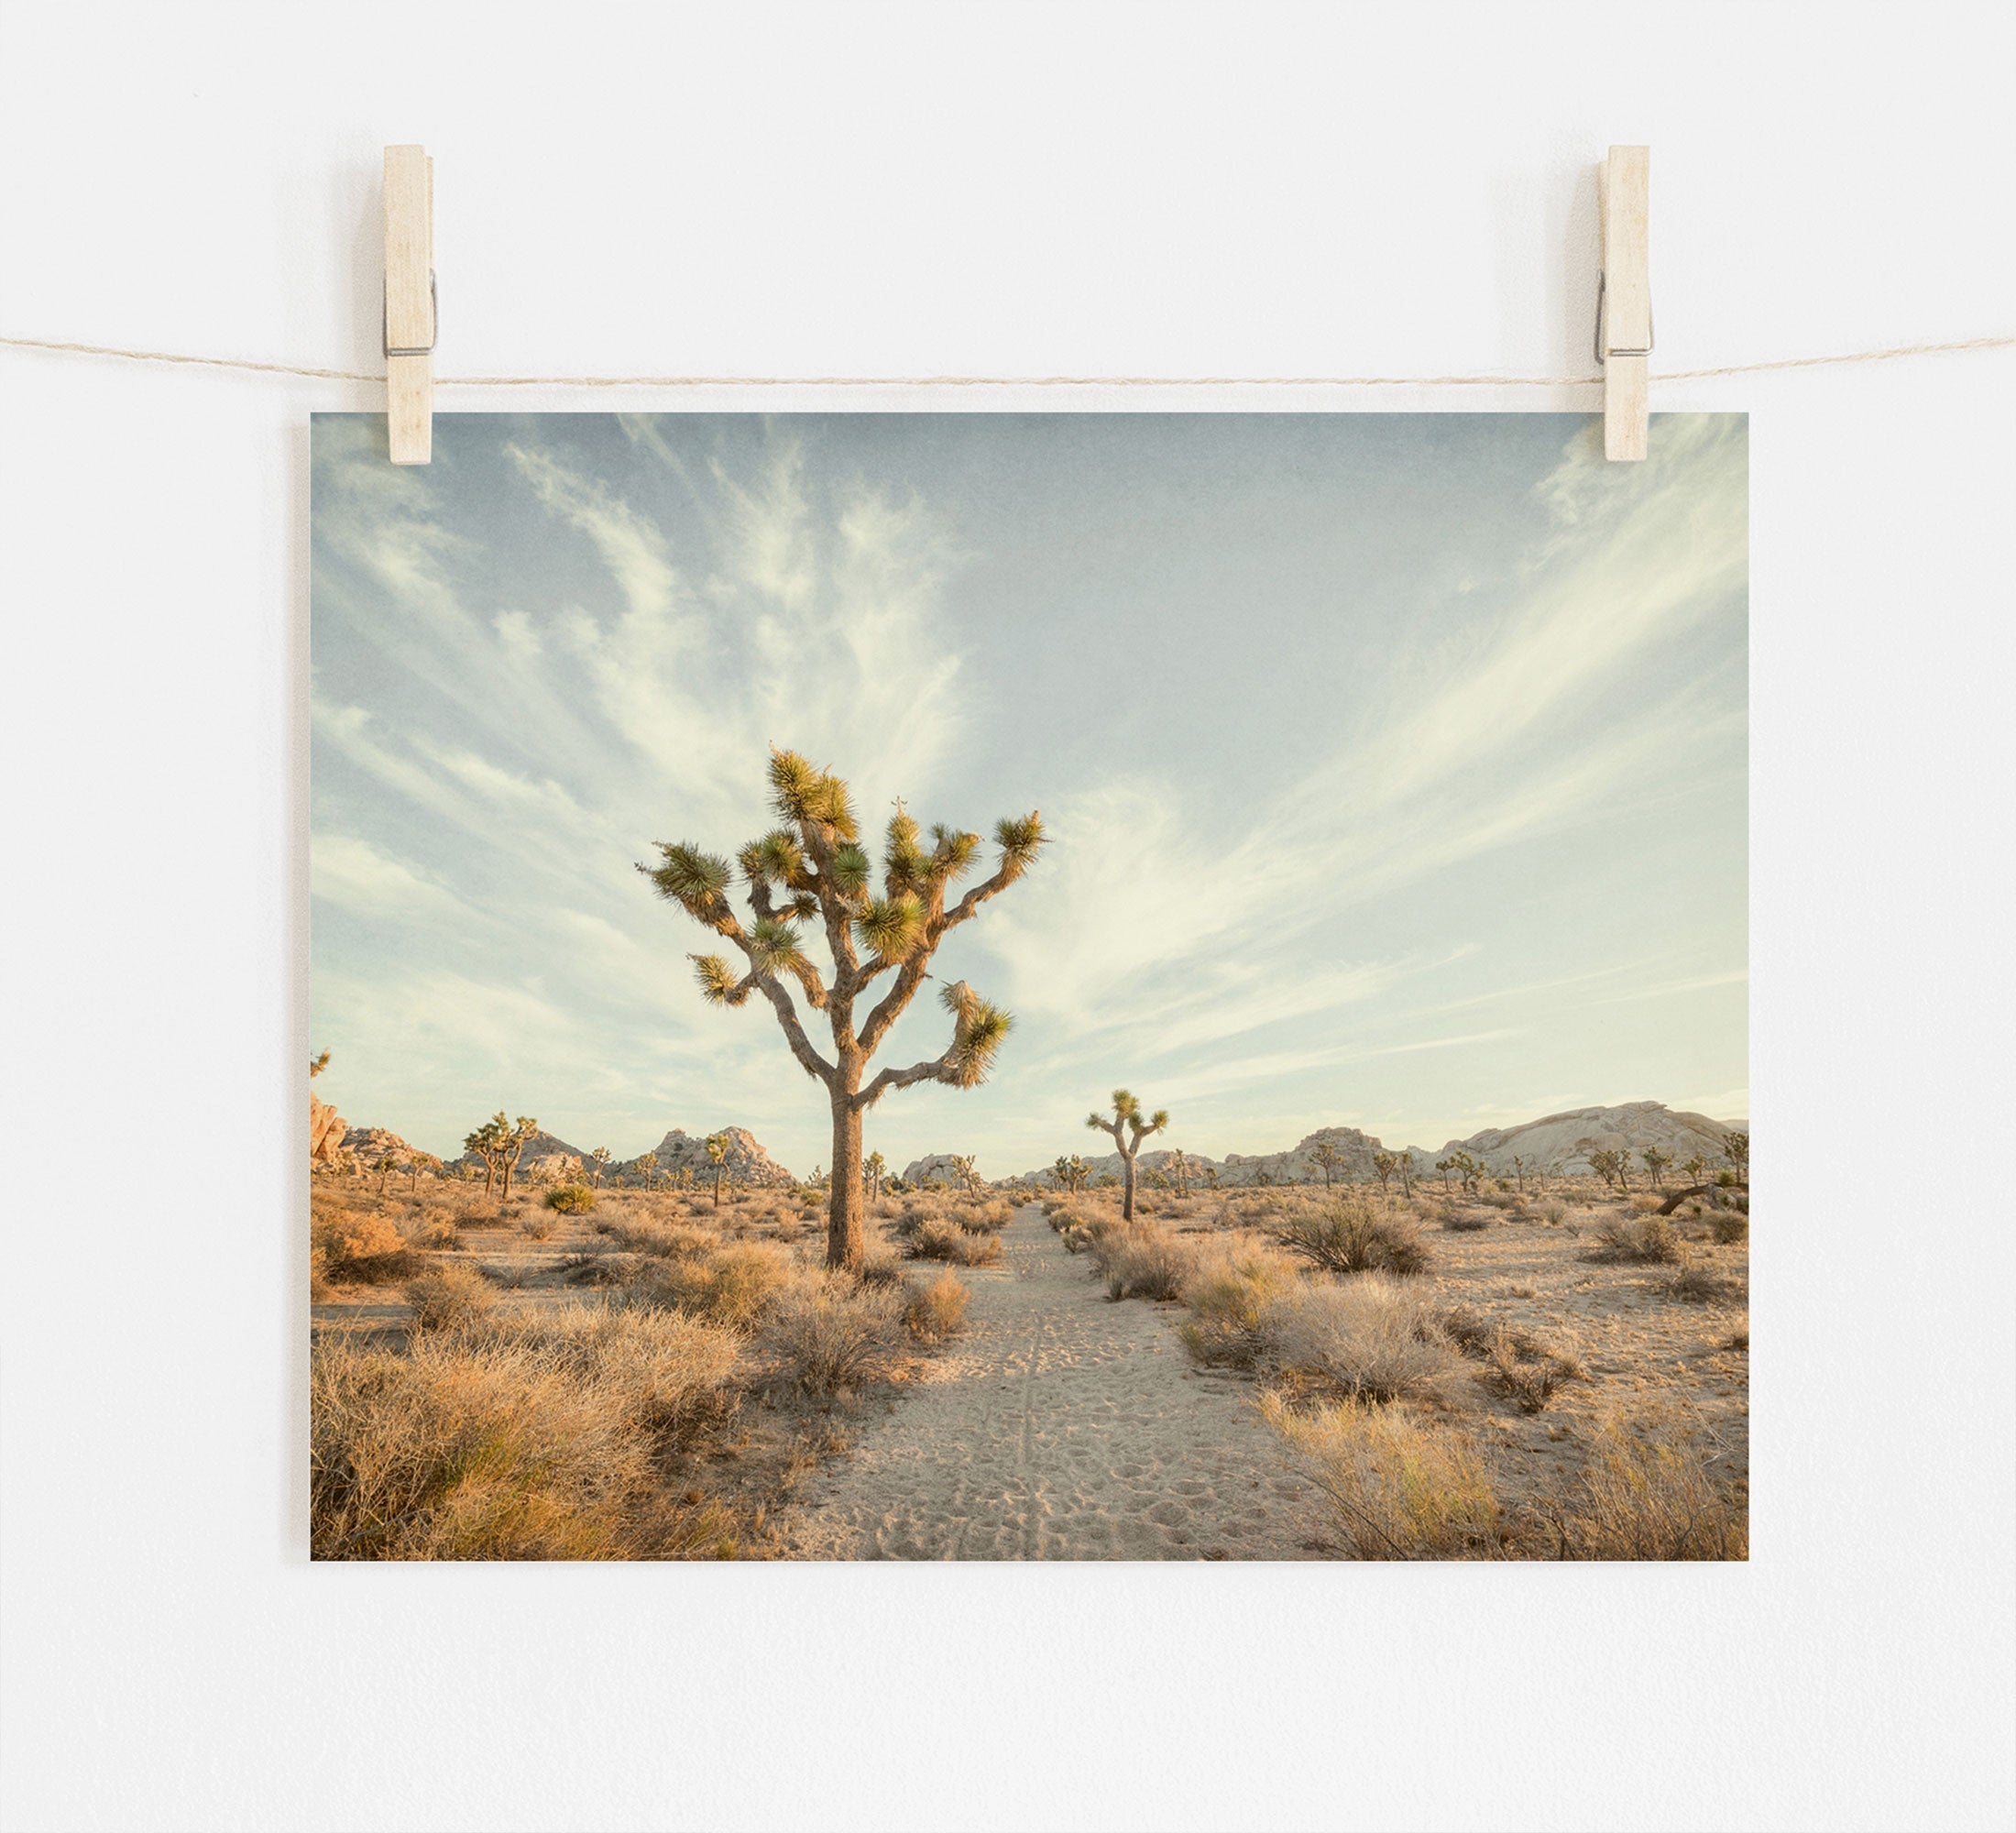 A photograph of a 'Path to Joshua' joshua tree print by Offley Green, printed on archival photographic paper and pinned to a clothesline by two wooden clothespins against a clear sky background. The scene is serene with